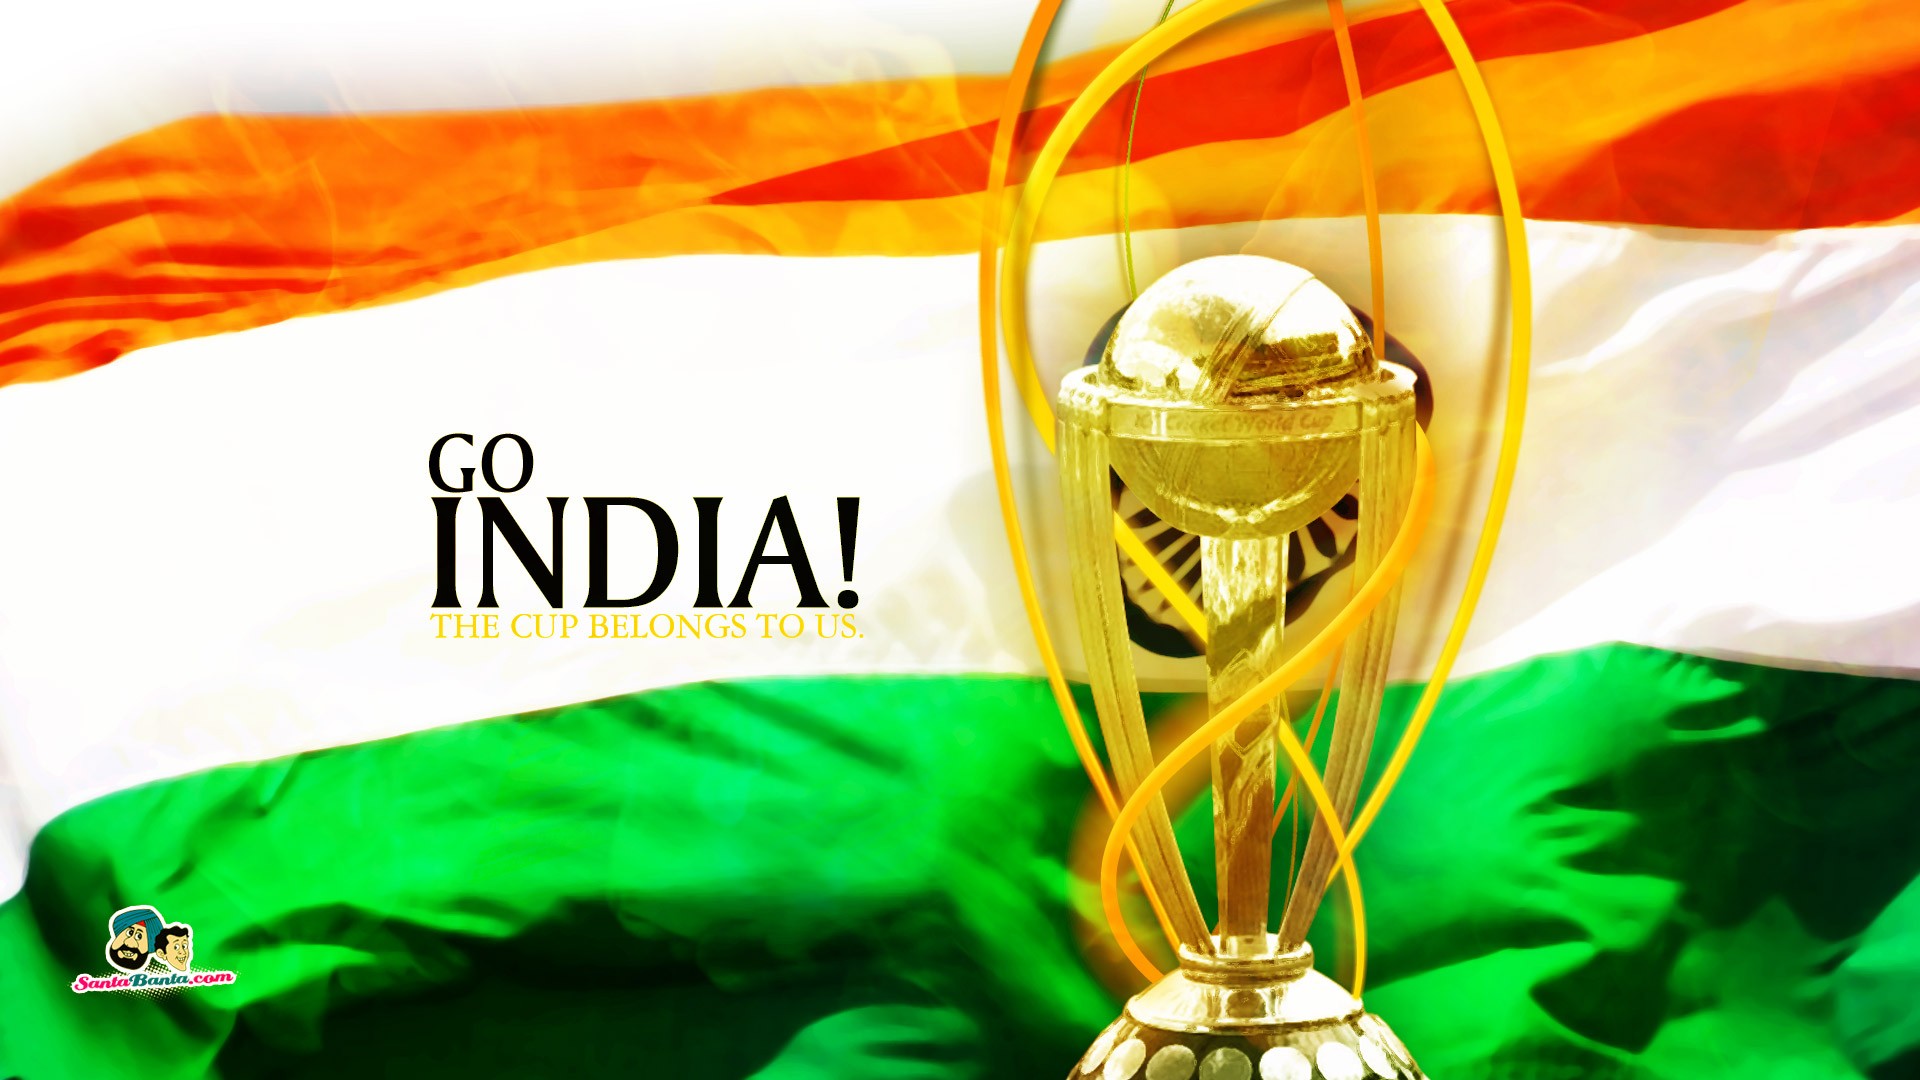 Download the India Cricket Cup Wallpaper, India Cricket Cup iPhone ...